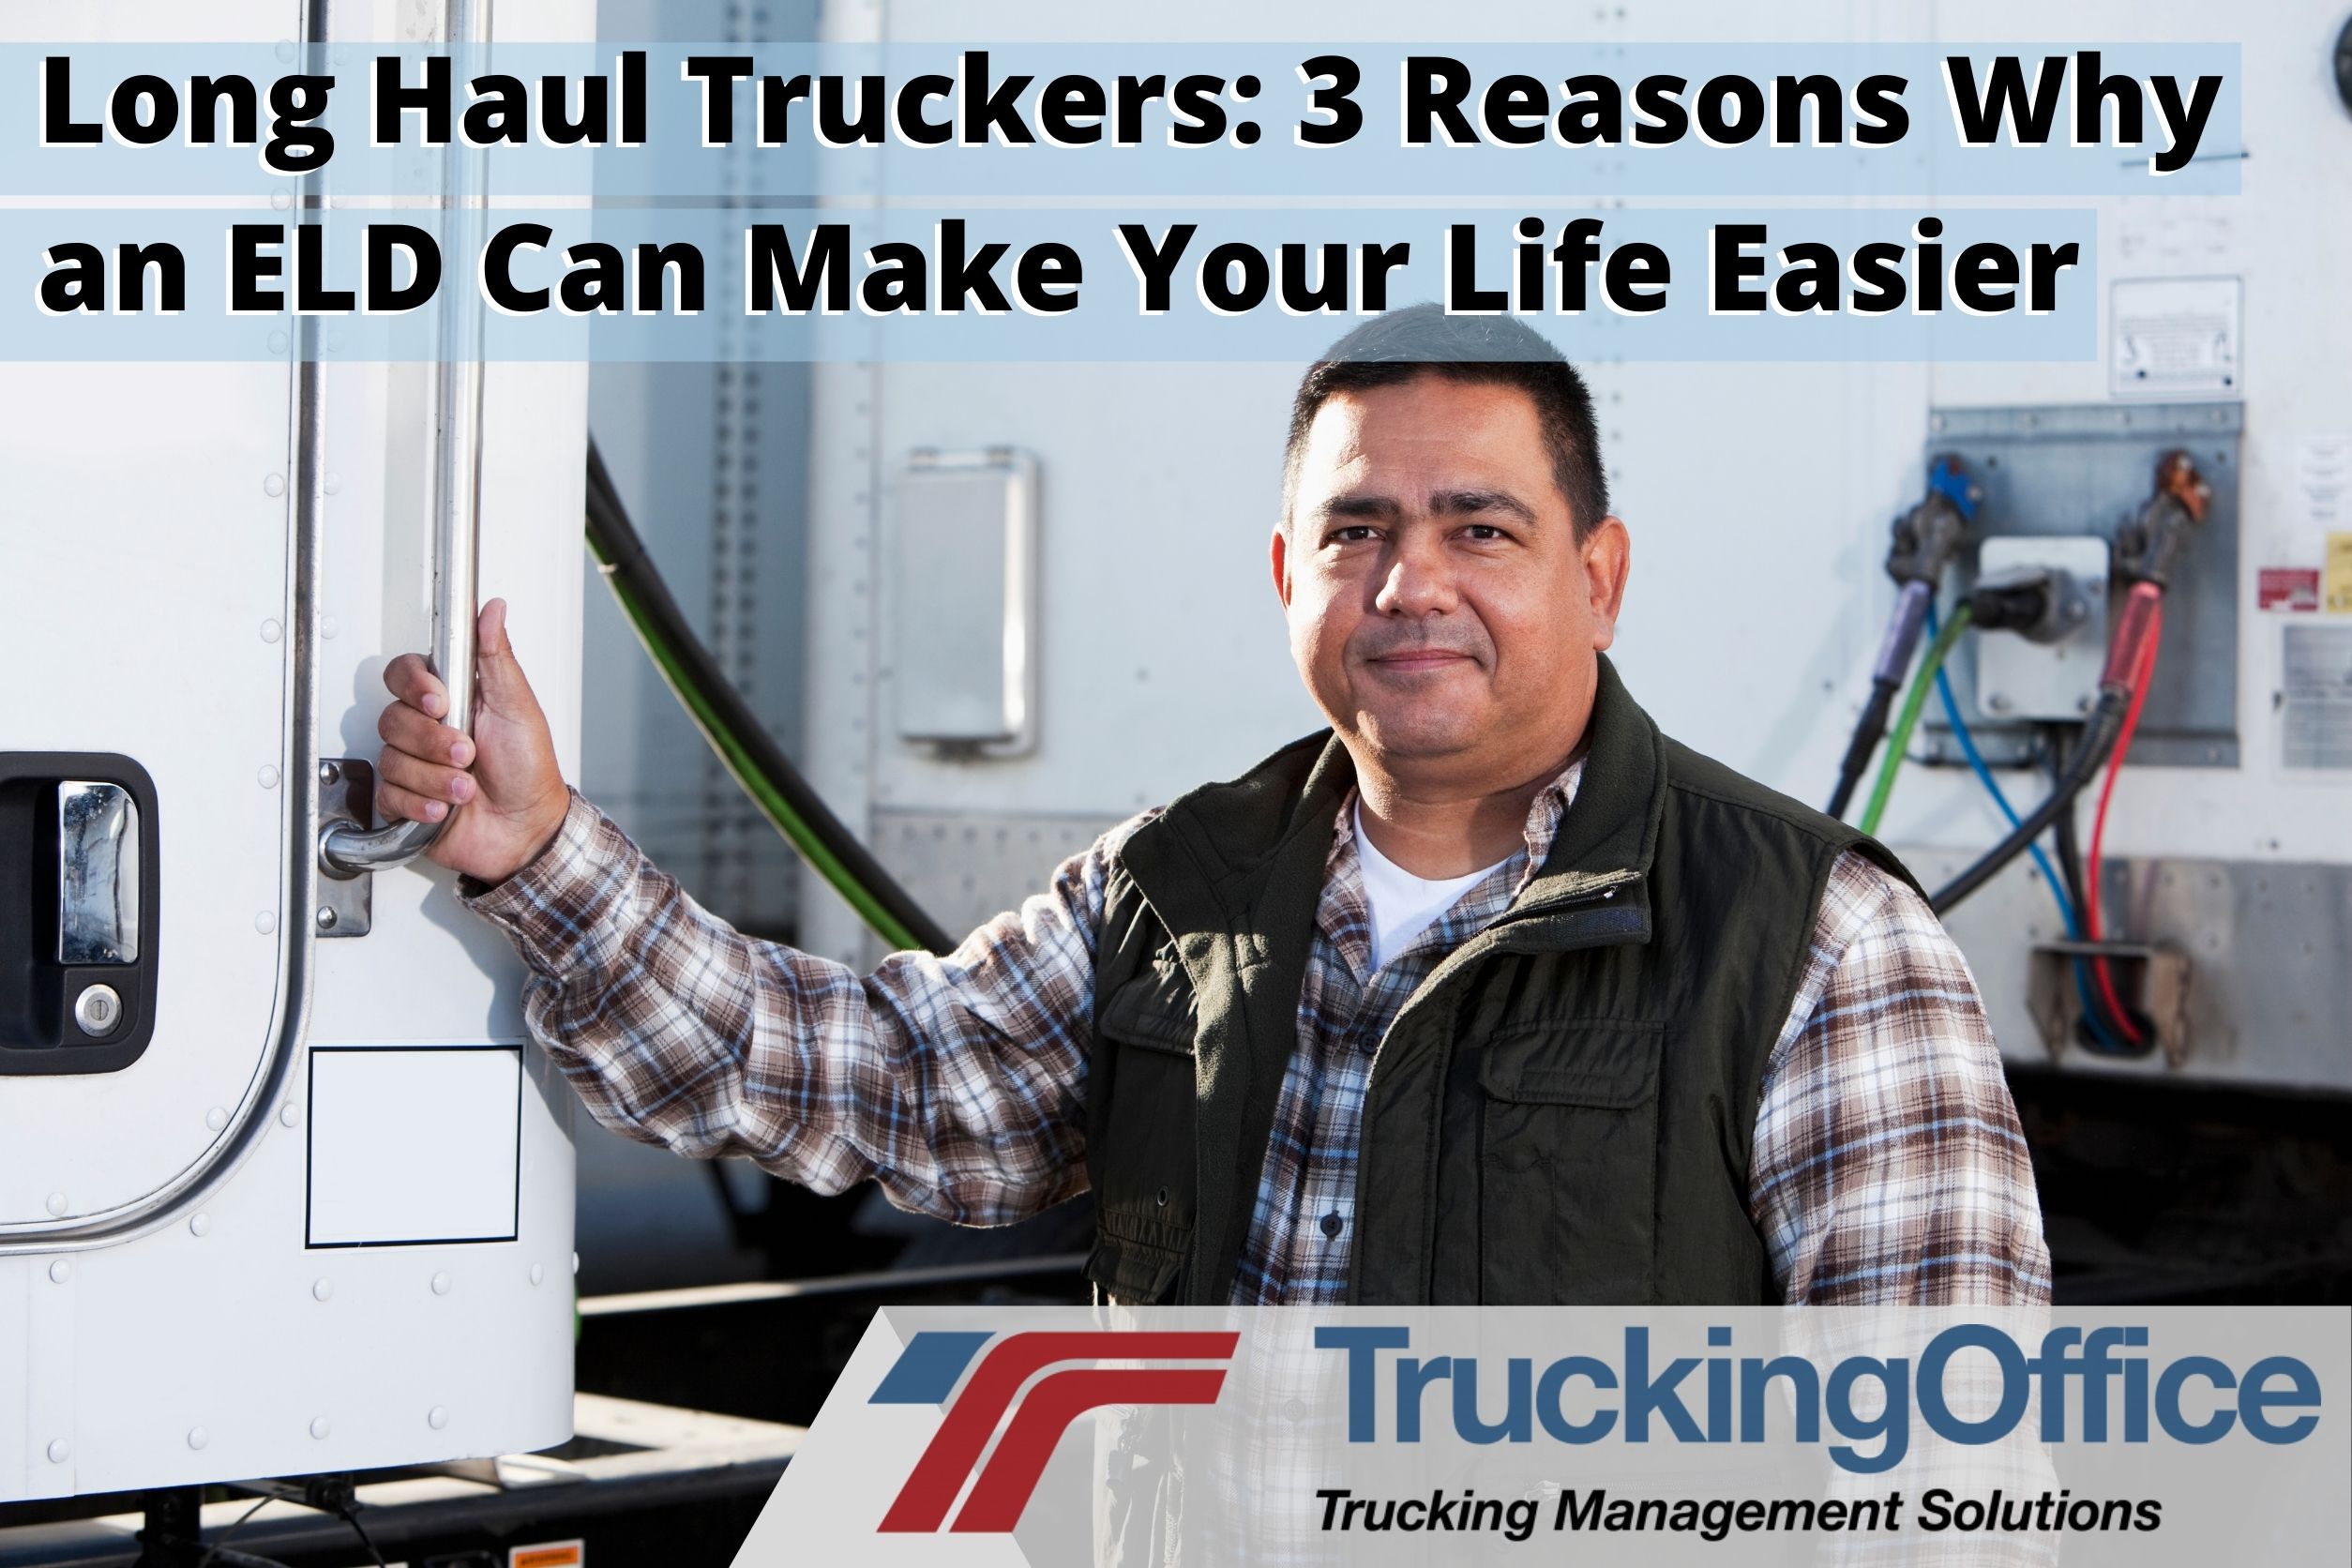 Long Haul Truckers: 3 Reasons Why an ELD Can Make Your Life Easier